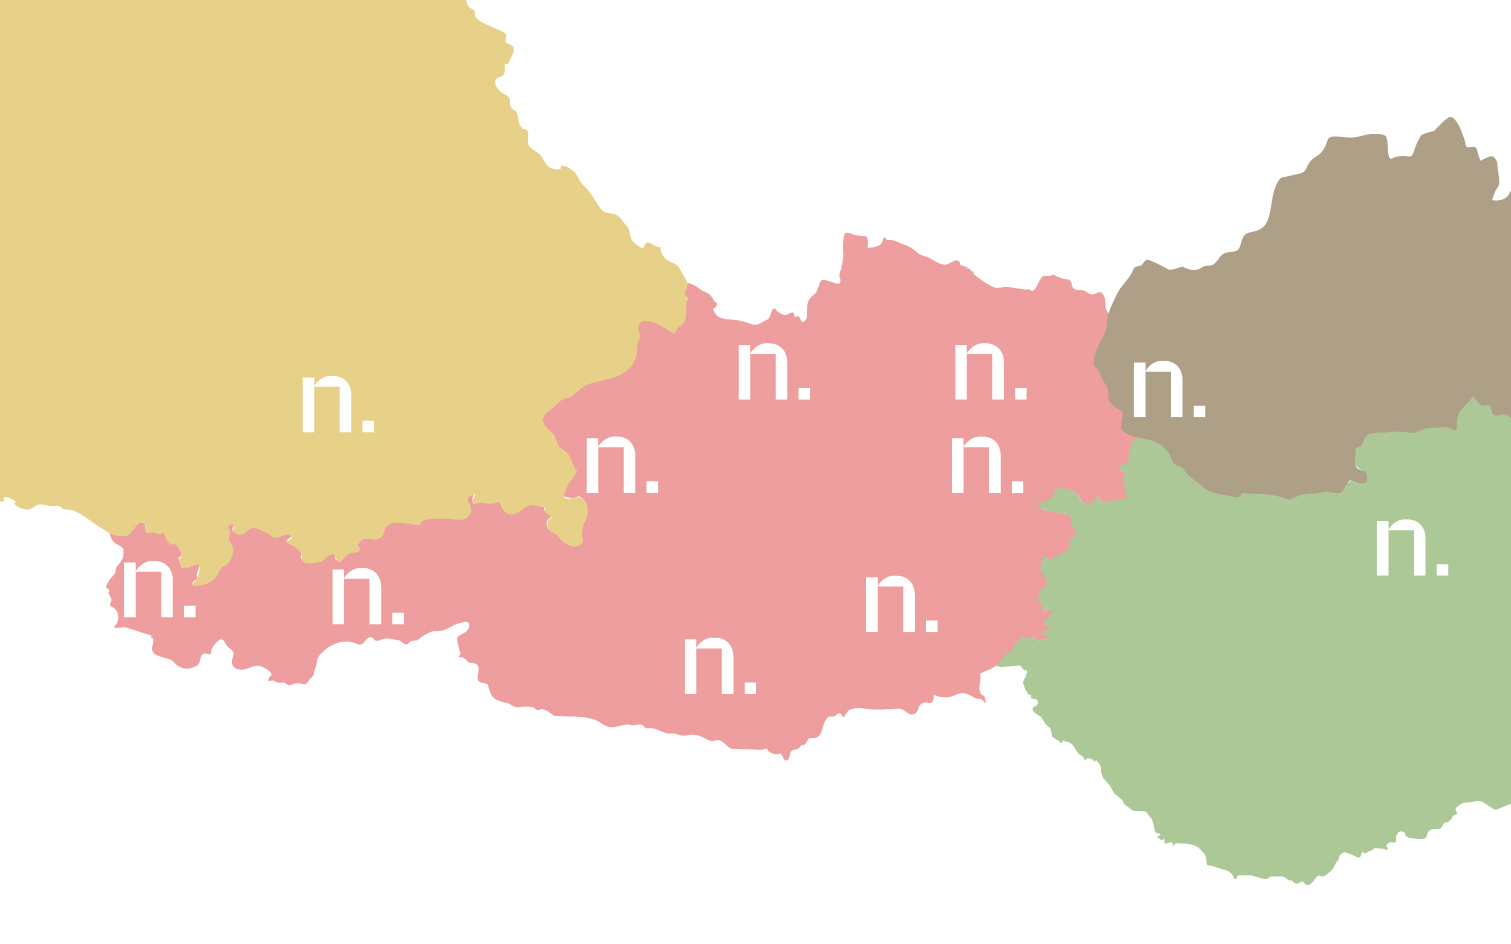 A map shows Austria, Germany, Slovakia and Hungary. Austria is red, Germany is yellow, Slovakia is brown and Hungary is light green.